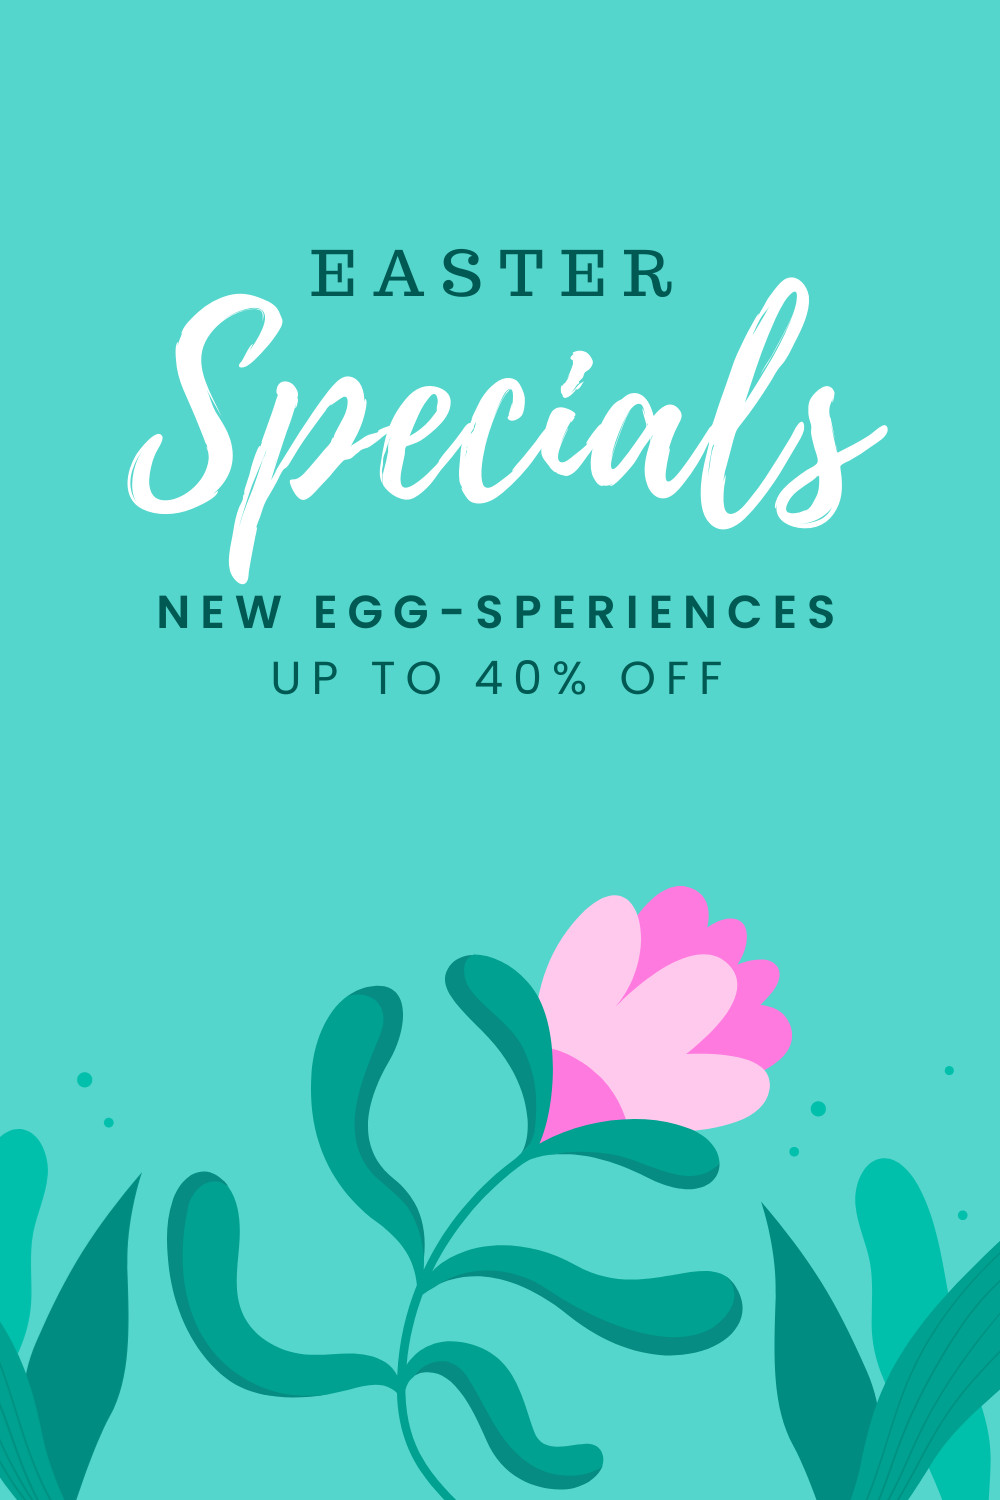 Easter Specials New Egg-sperience